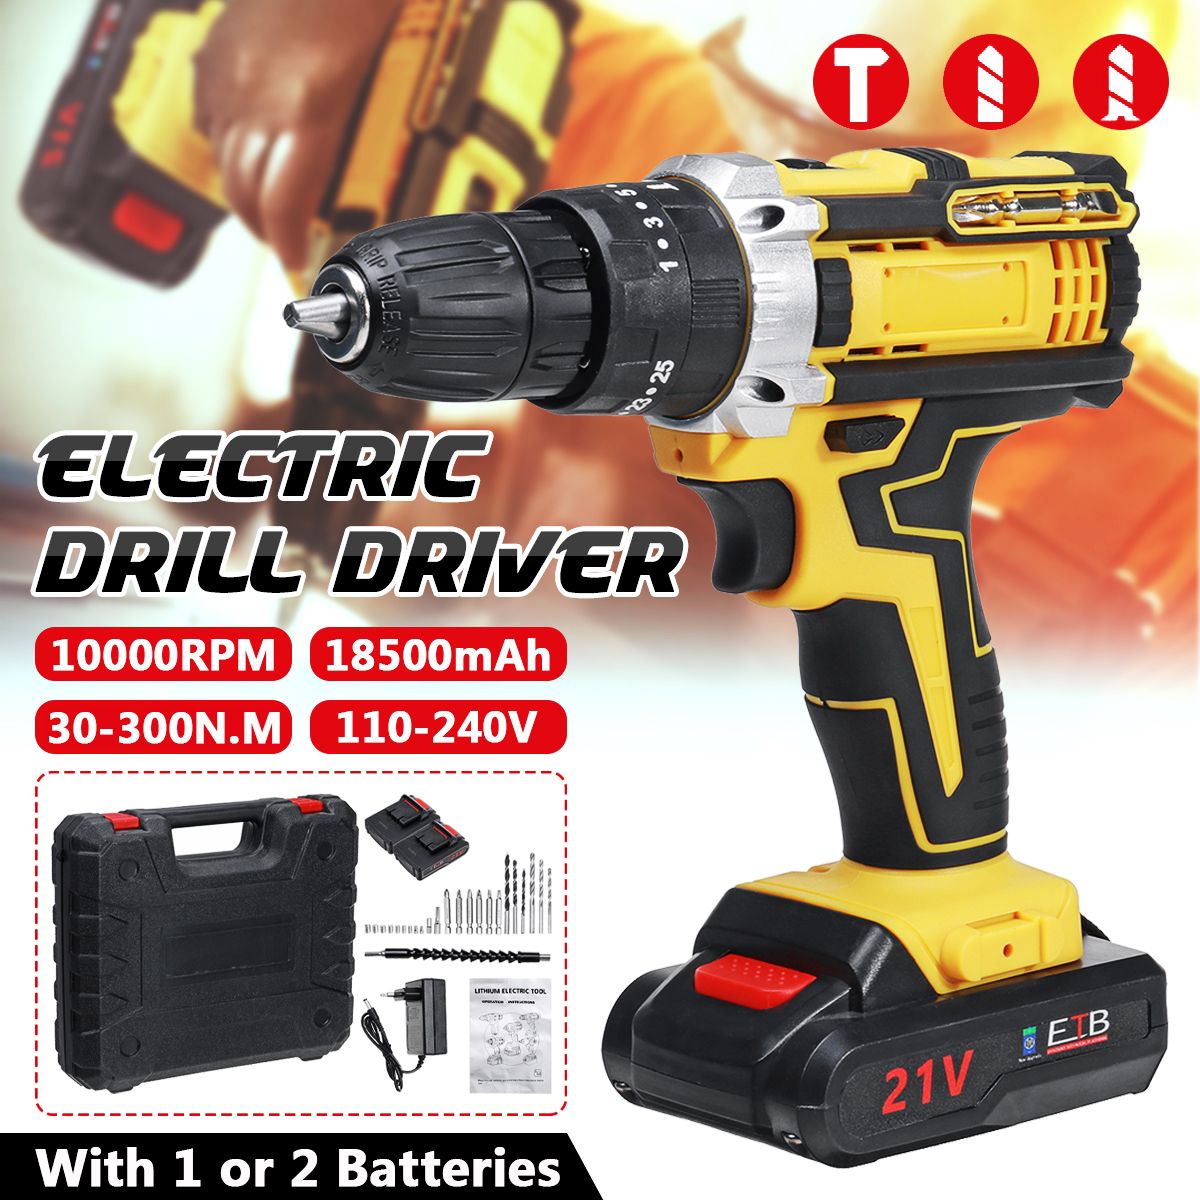 18500mAh-10mm-Cordless-Impact-Drill-Rechargeable-2-Speeds-LED-Electric-Drill-W-12pcs-Battery-1910512-7